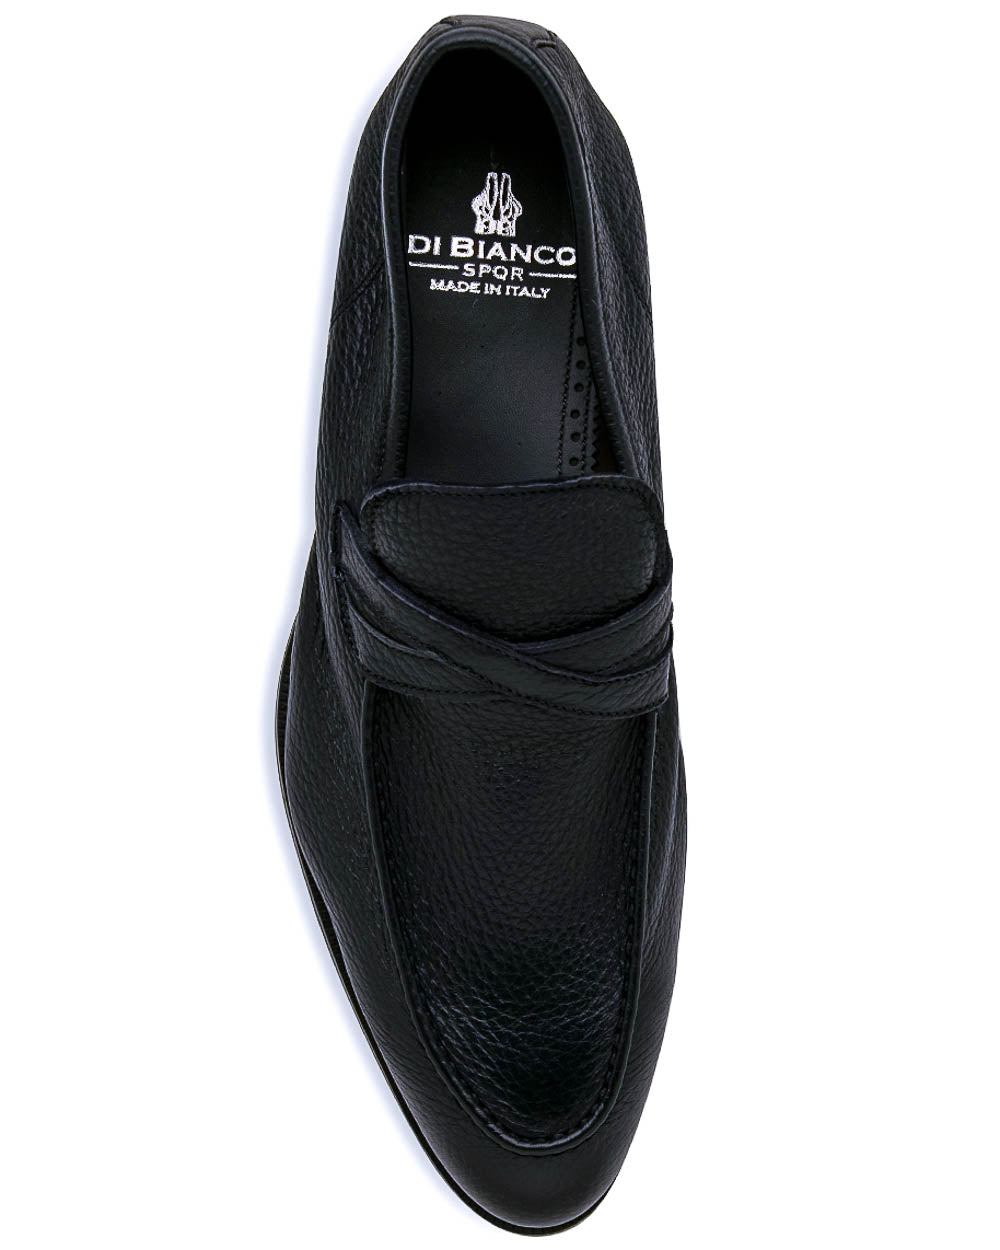 Abisso Crisscross Leather Loafer